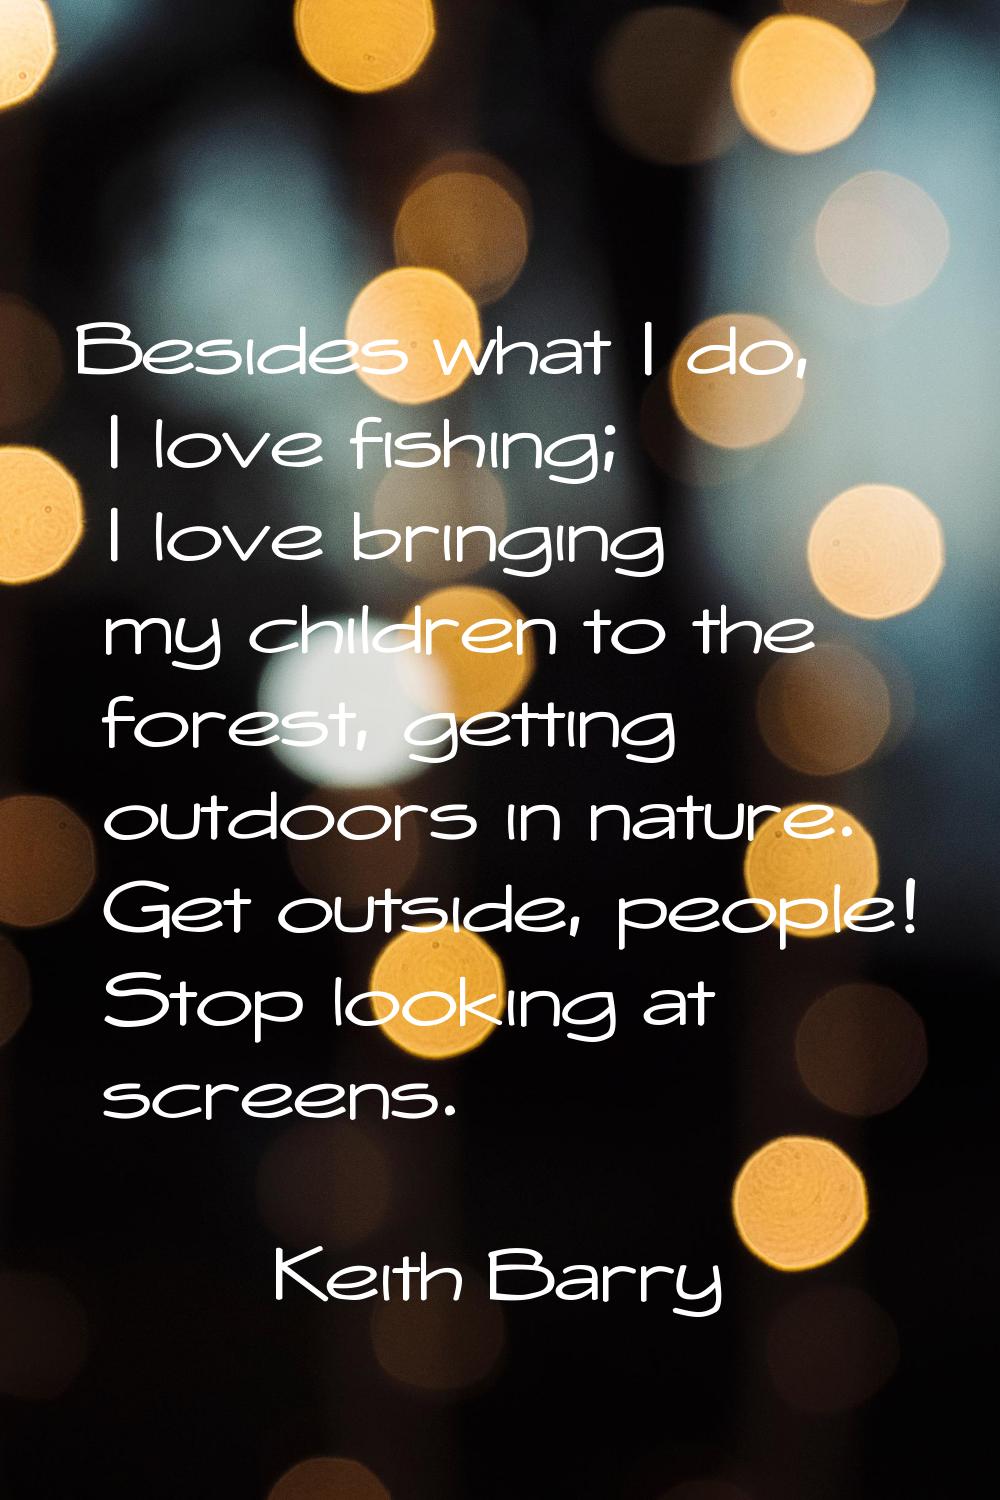 Besides what I do, I love fishing; I love bringing my children to the forest, getting outdoors in n